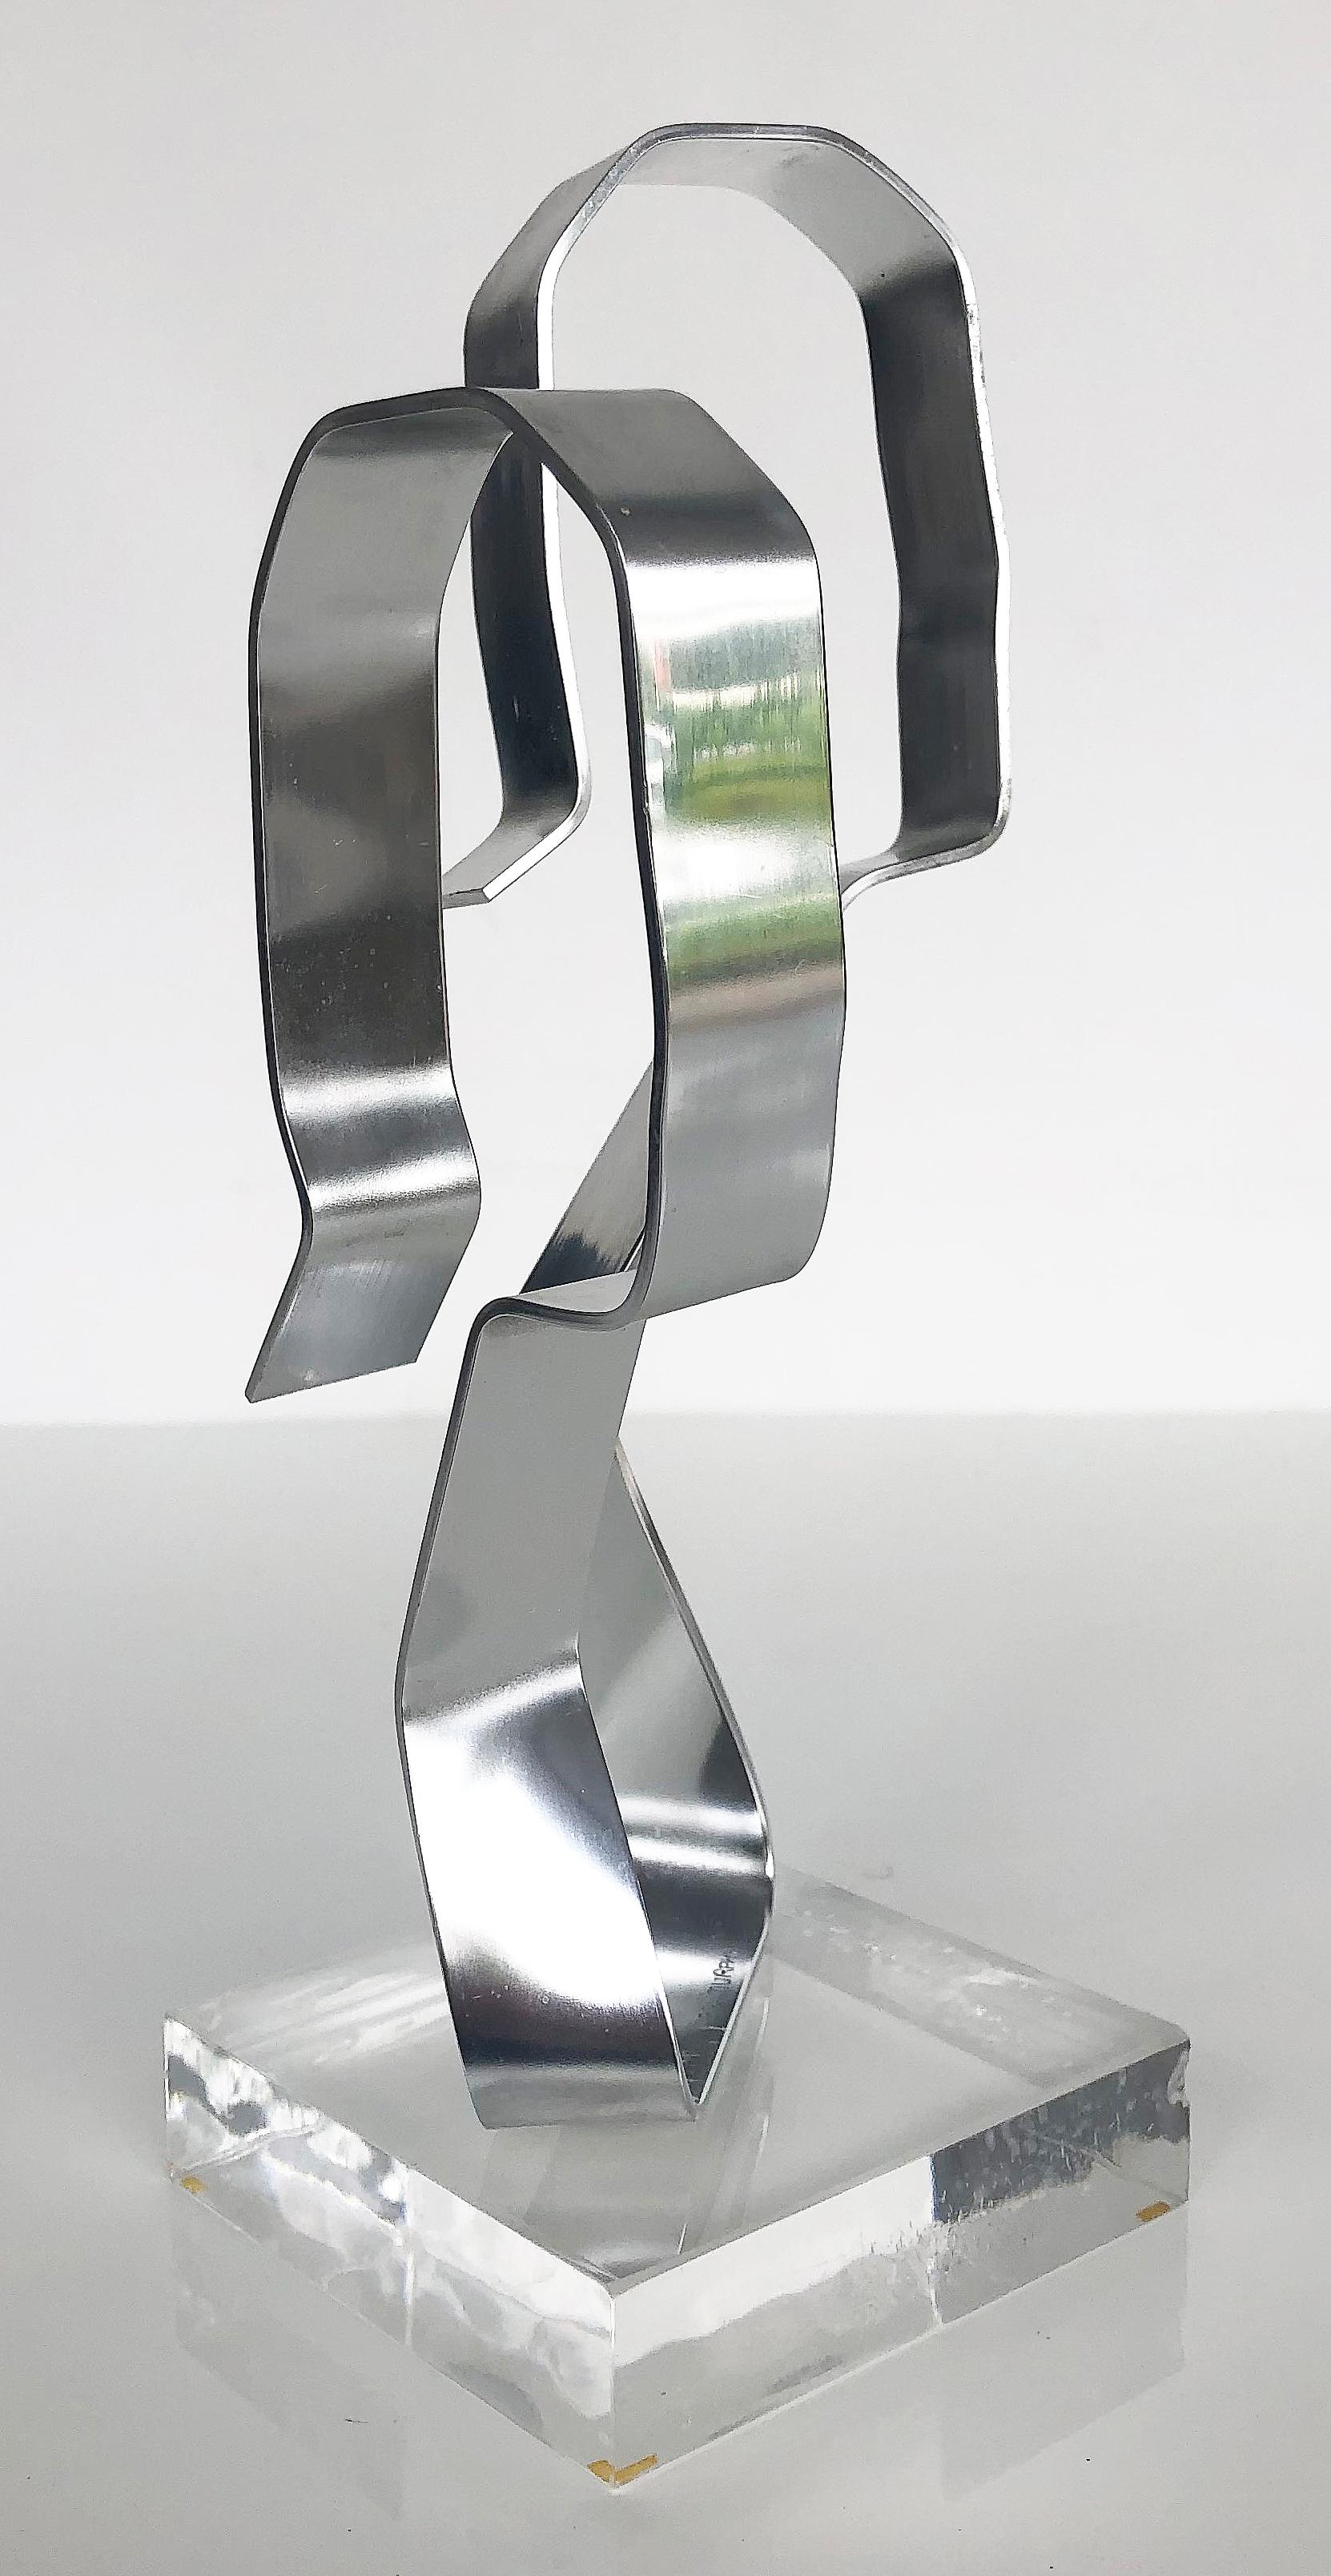 Polished Dan Murphy Abstract Aluminum Free-form Sculpture on Lucite, Signed & Dated 1977